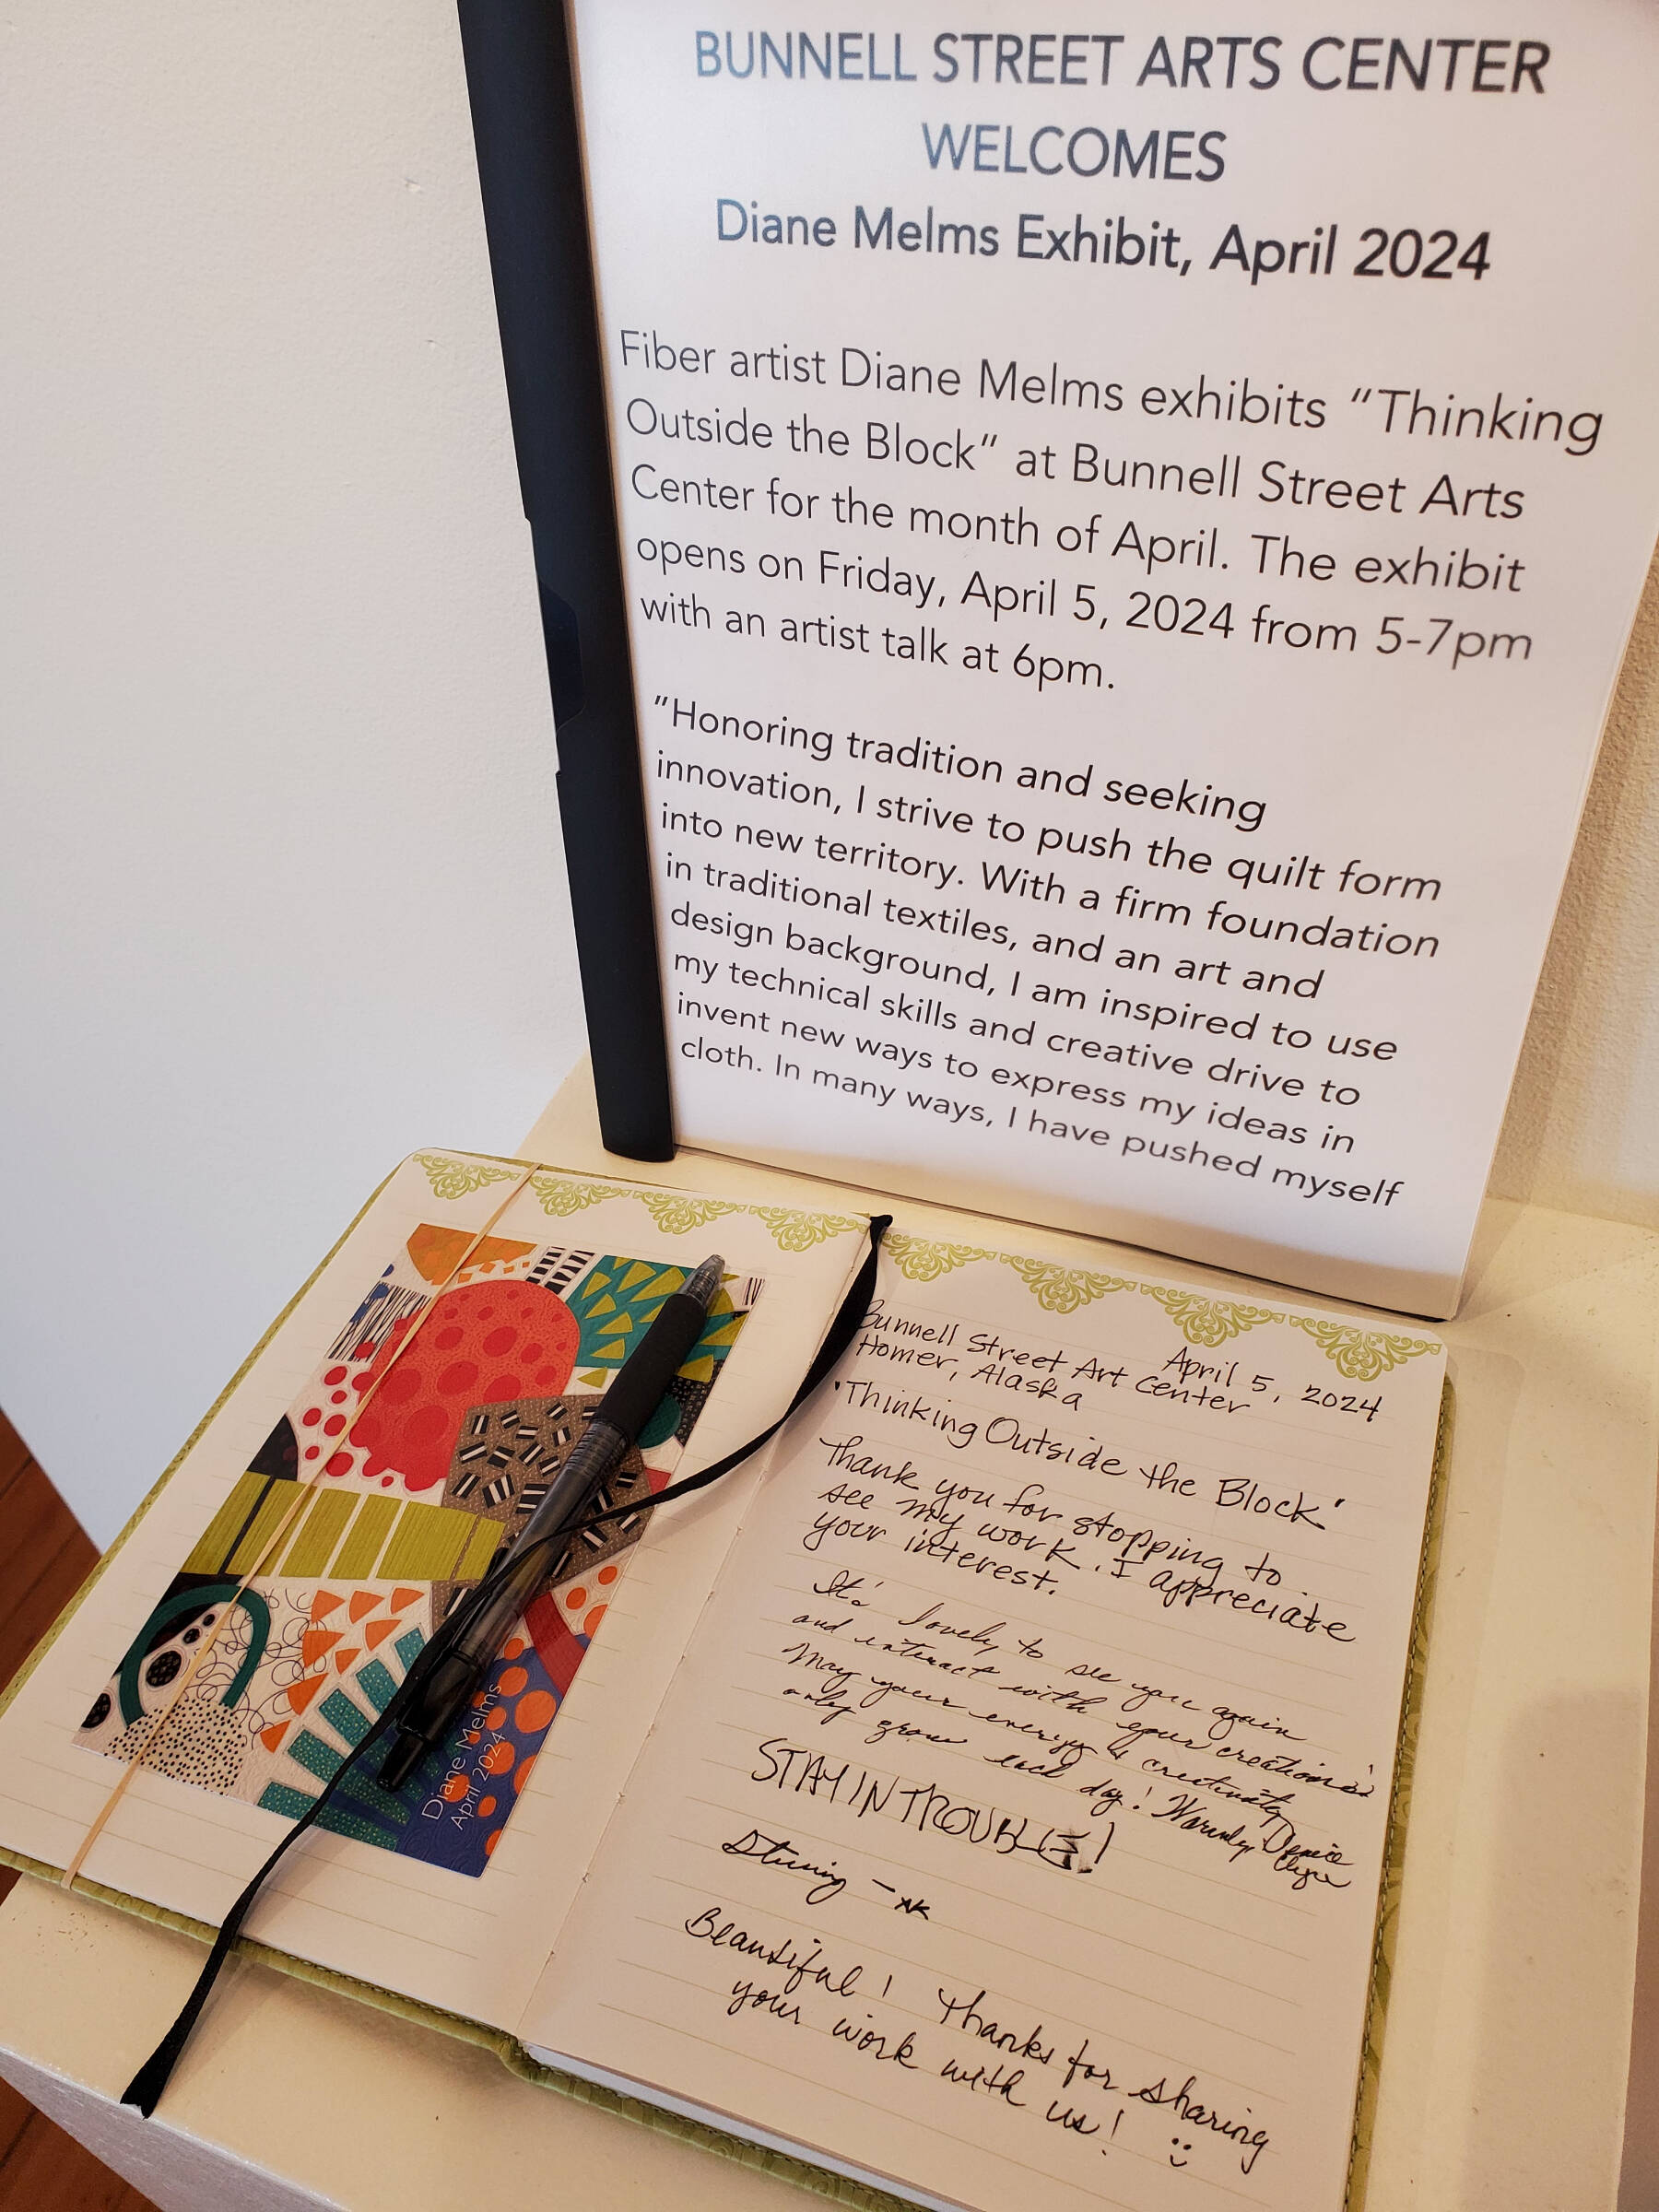 Community members leave notes, photographed on Saturday, April 6, 2024, for fiber artist Diane Melms during her ongoing exhibit, “Thinking Outside the Block,” at Bunnell Street Arts Center in Homer, Alaska. (Delcenia Cosman/Homer News)